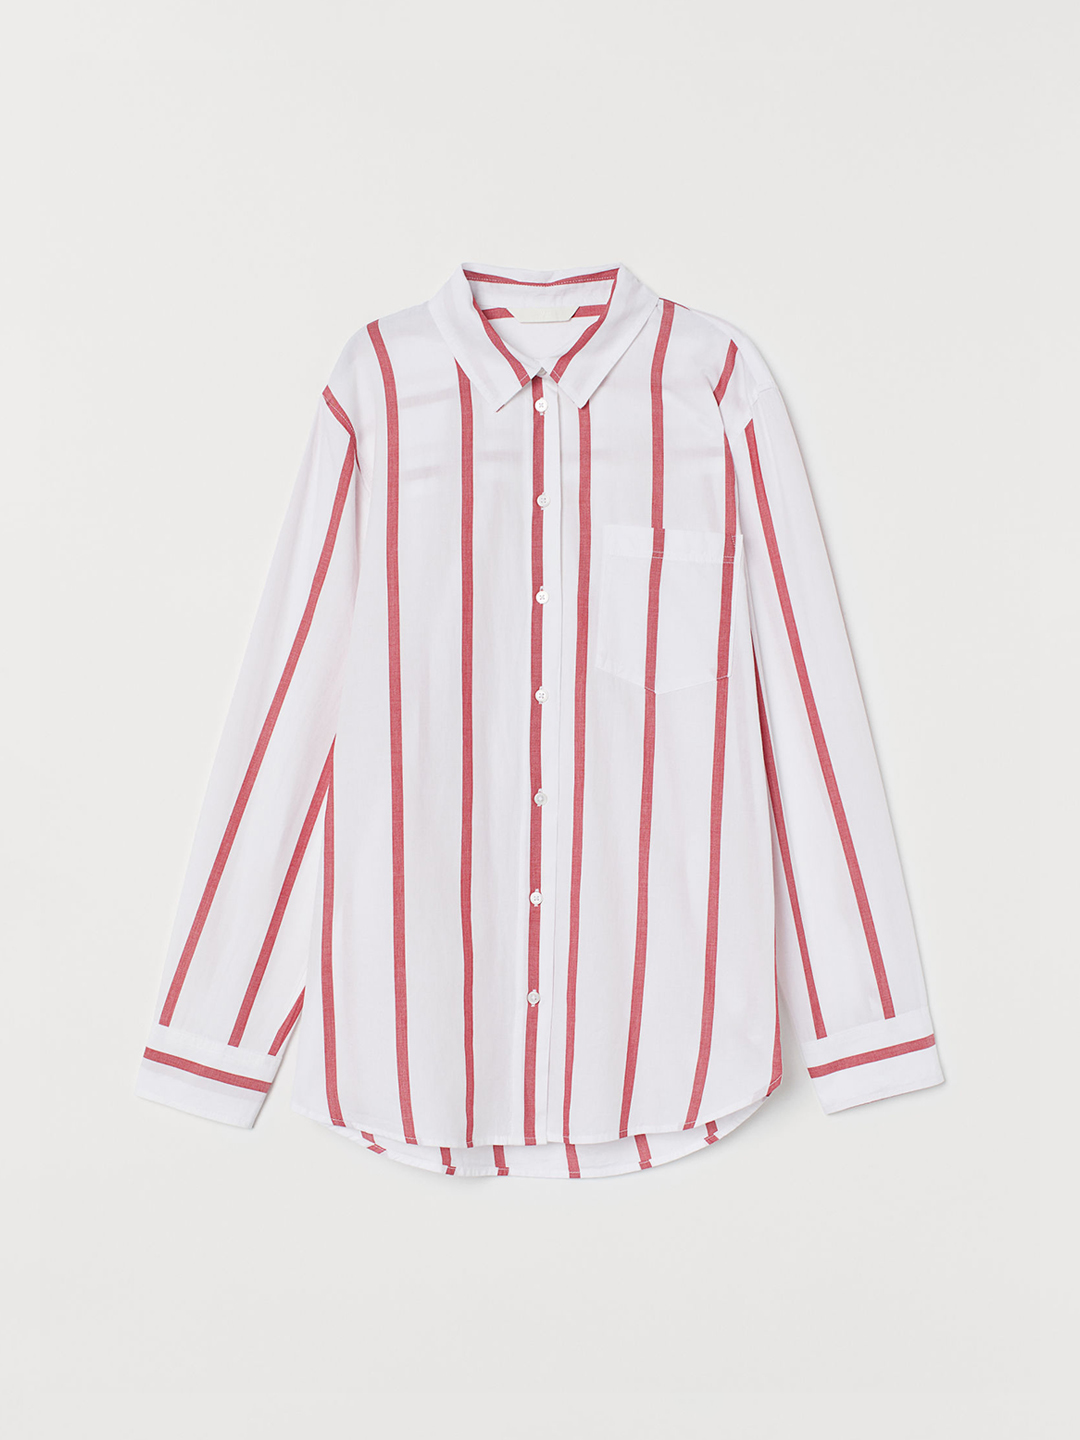 H&M Women White & Red Striped Cotton Shirt Price in India